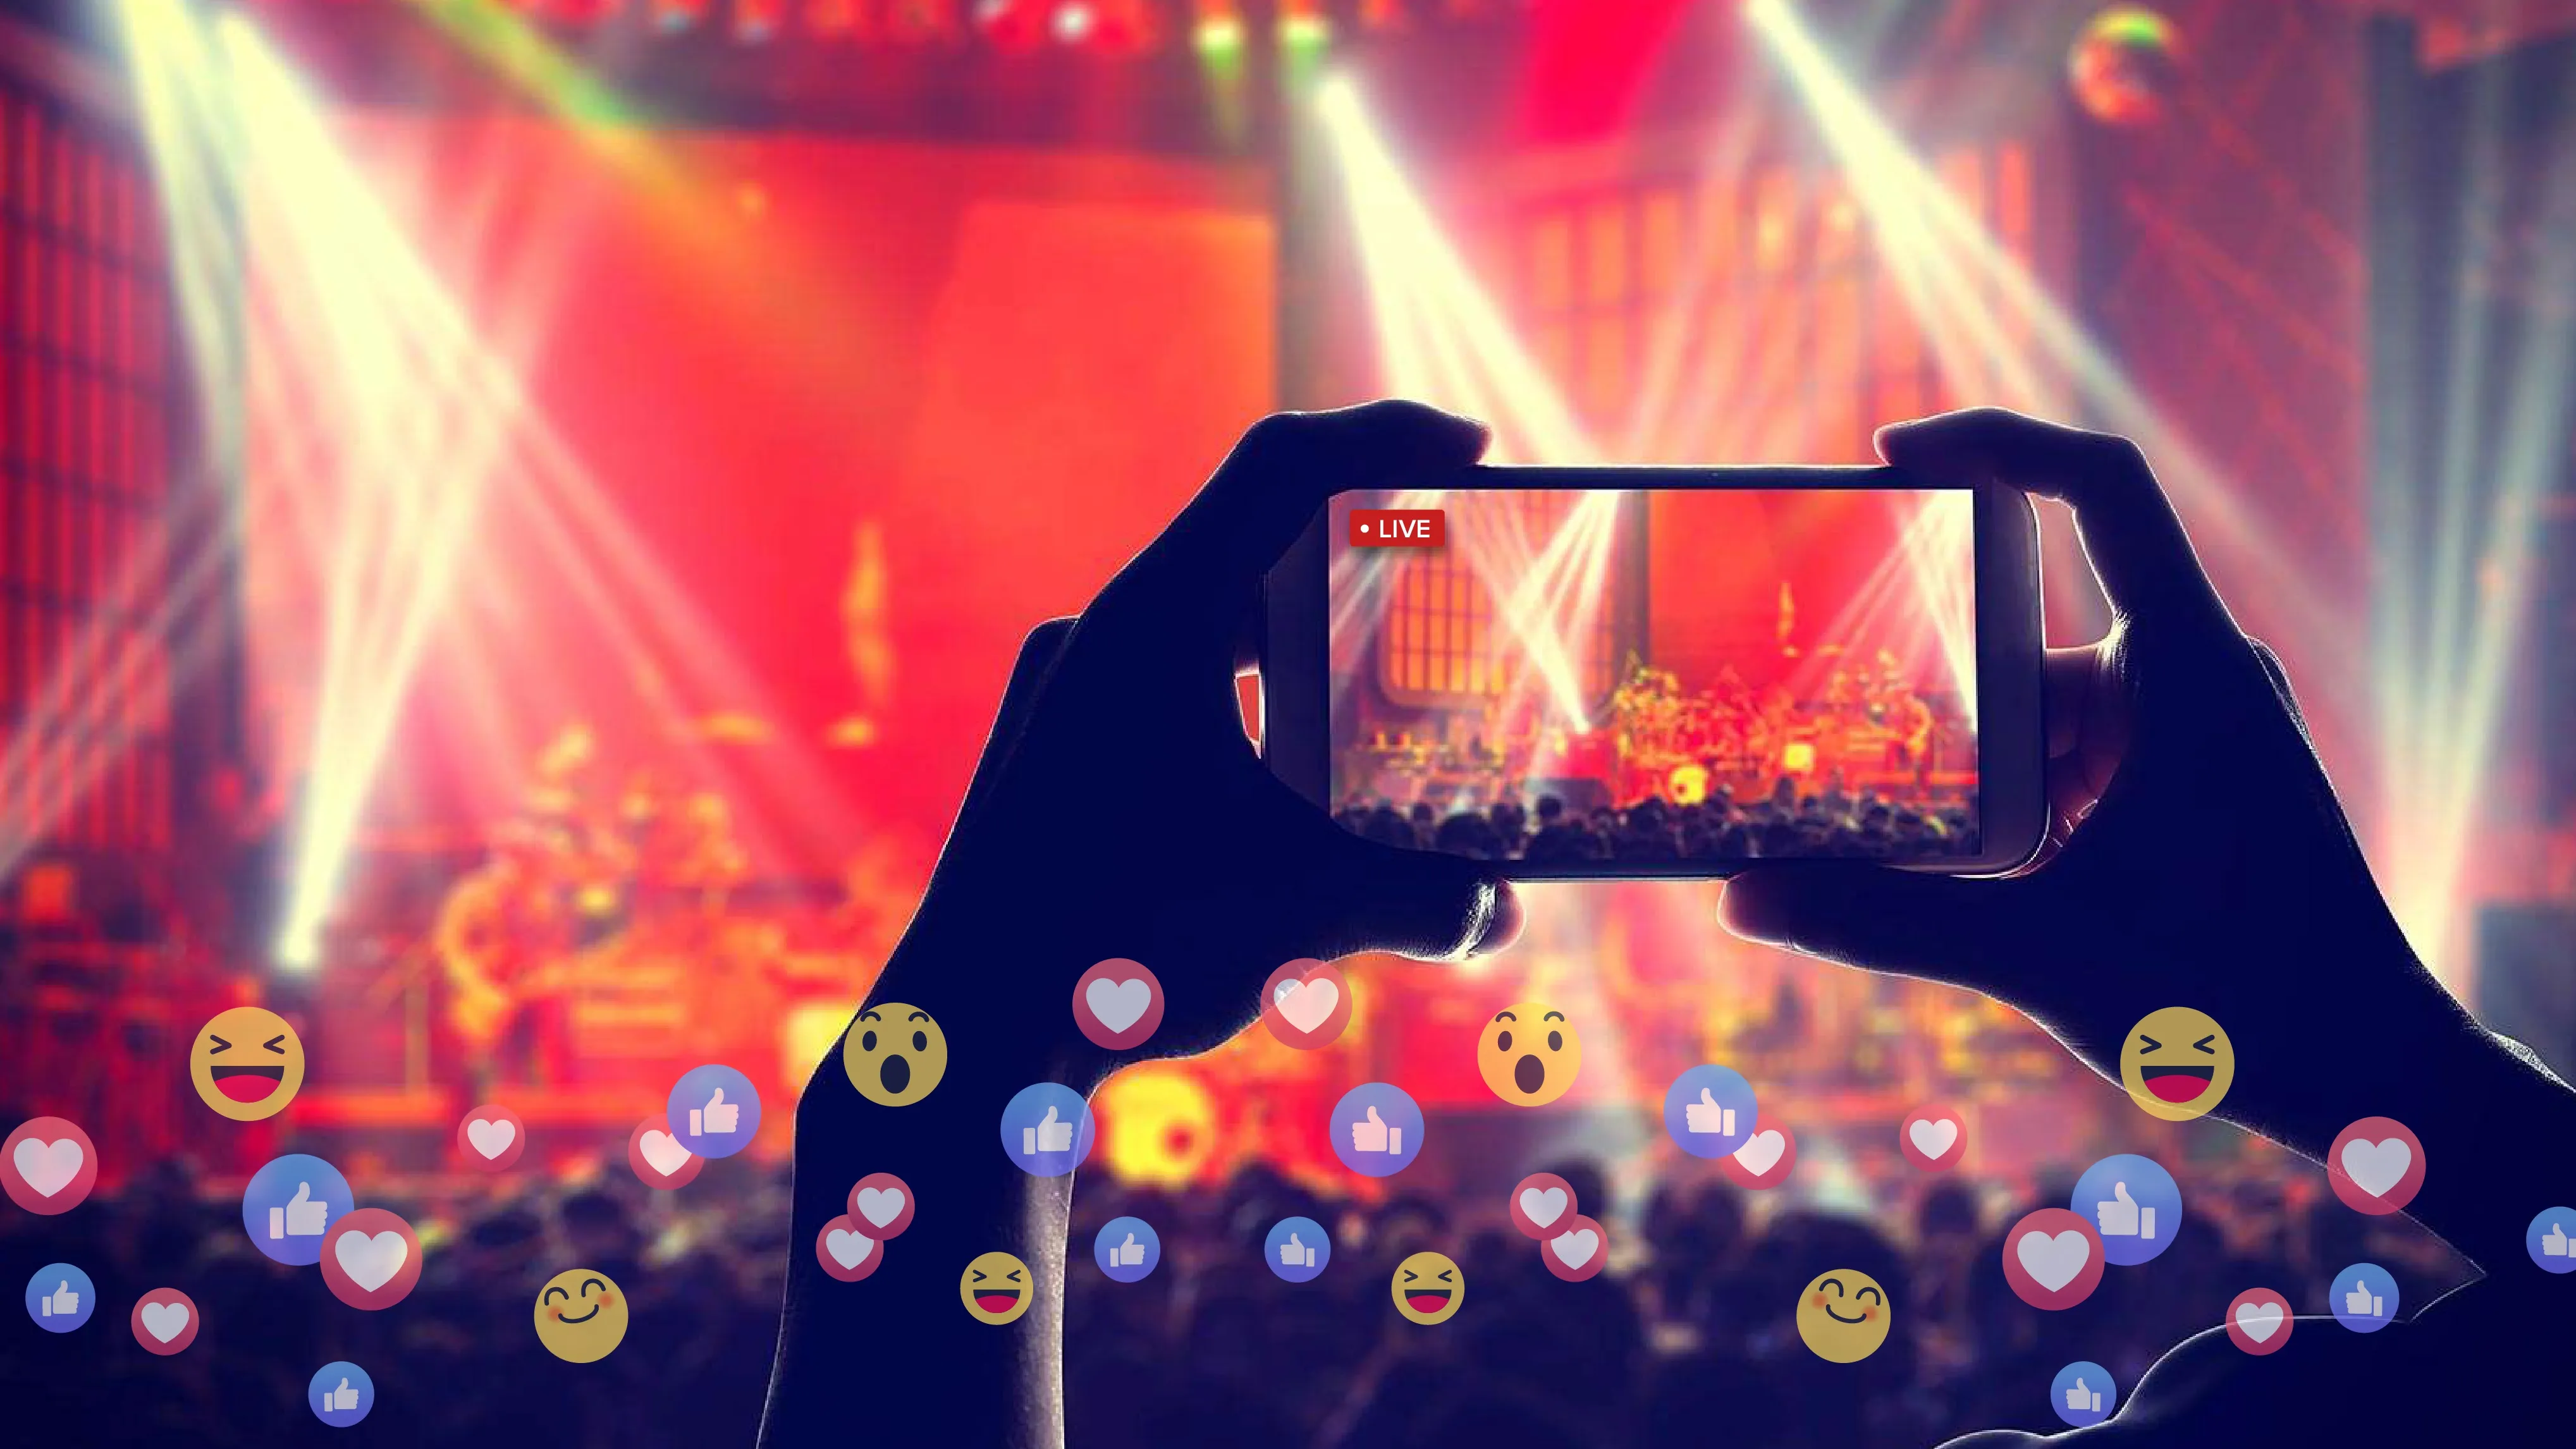 featured image - 10 Best Platforms To Build a Live Video Streaming Website, App or Service in 2022